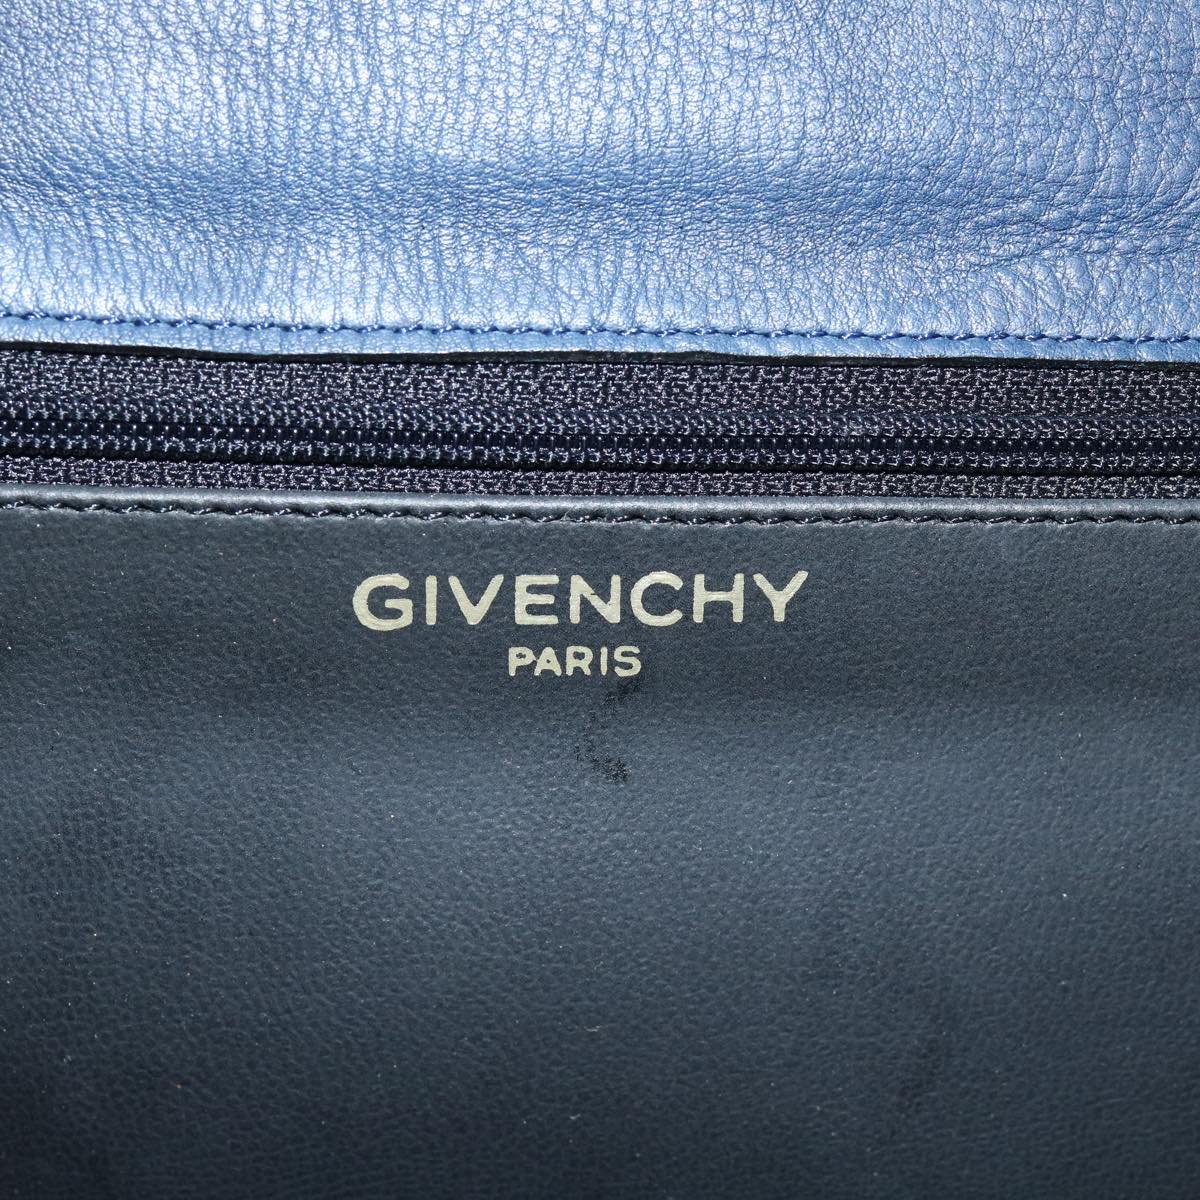 GIVENCHY Shoulder Bag Leather Navy Auth bs12857